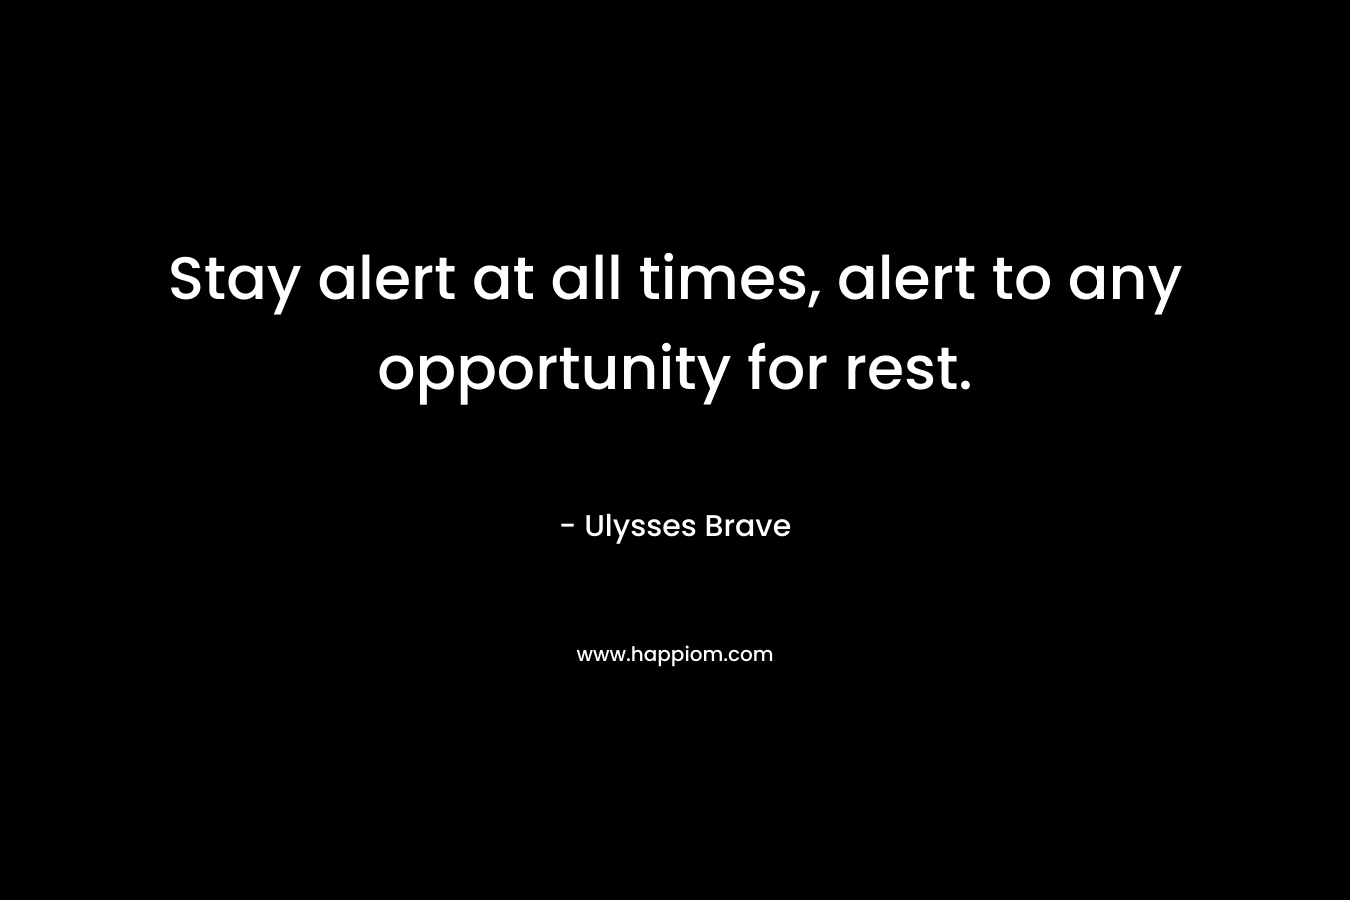 Stay alert at all times, alert to any opportunity for rest.